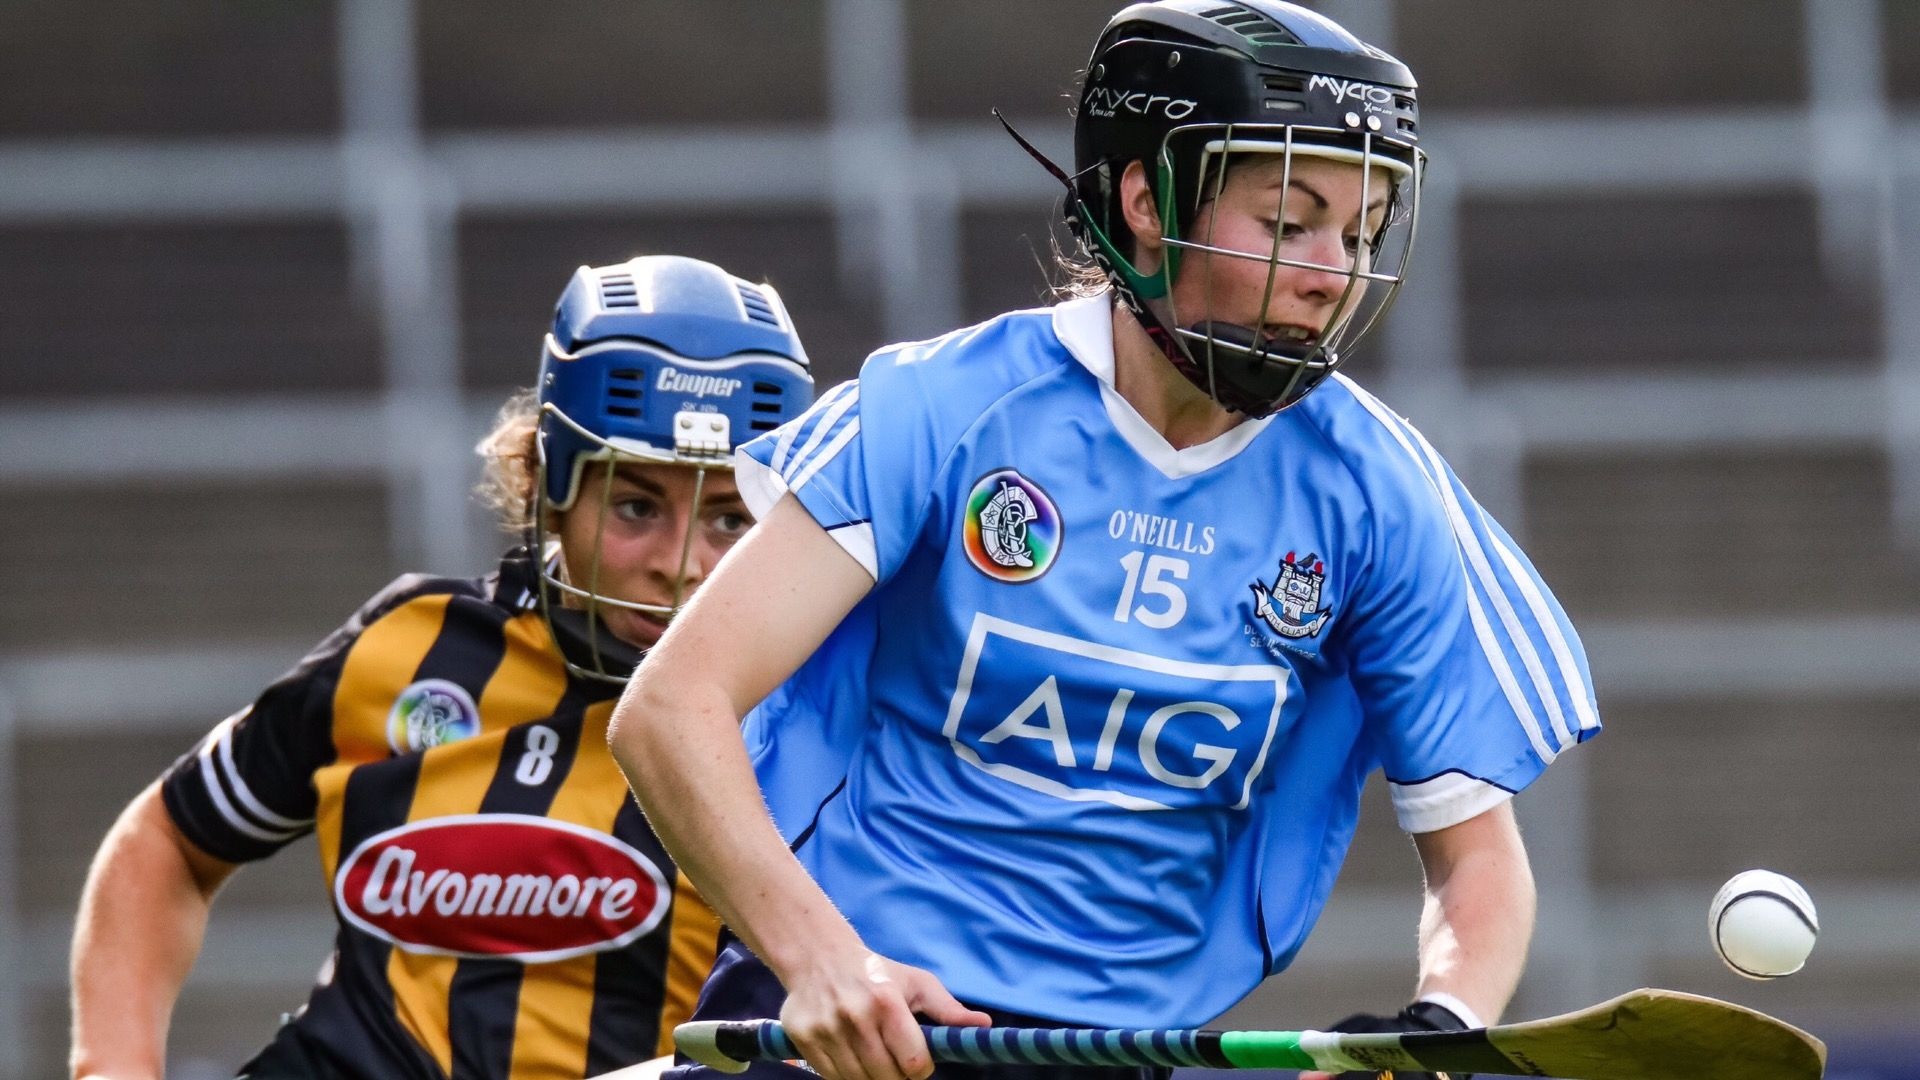 Hurling: Camogie, An Irish stick-and-ball team sport played by women. 1920x1080 Full HD Background.